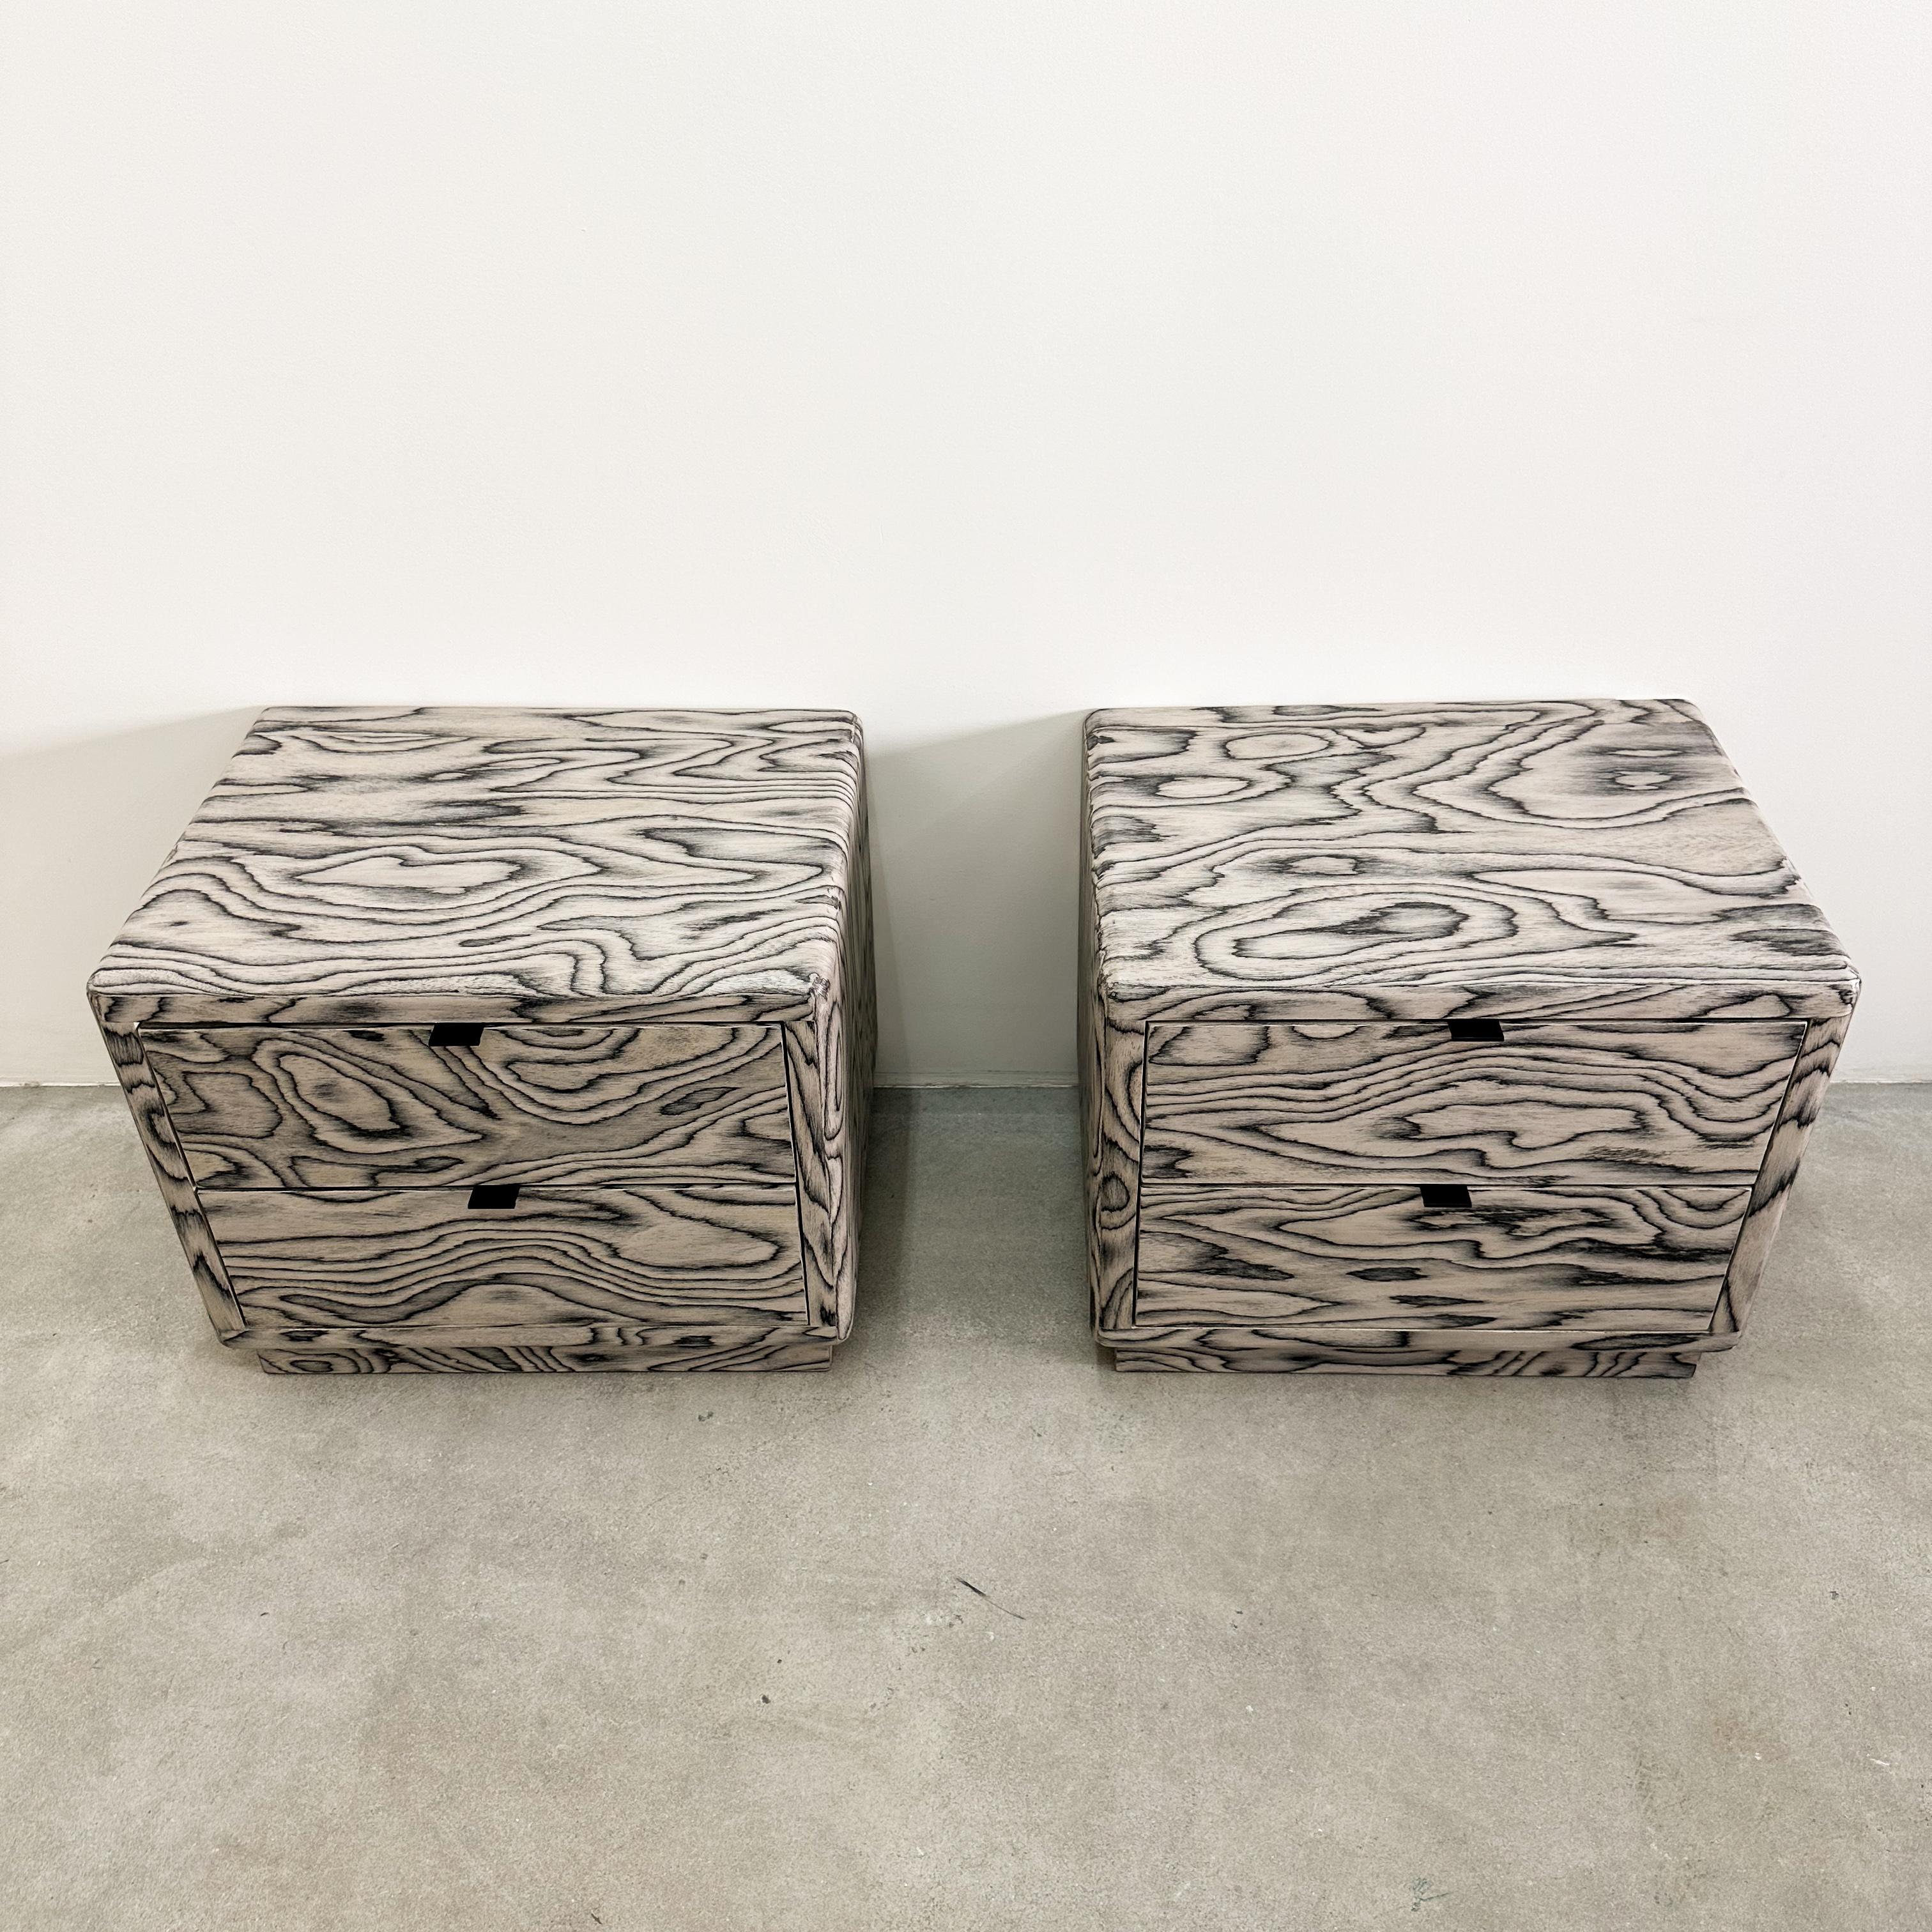 Pair of Vintage Nightstands Featuring Ettore Sottsass Veneer 70s 80s In Good Condition For Sale In Palm Desert, CA